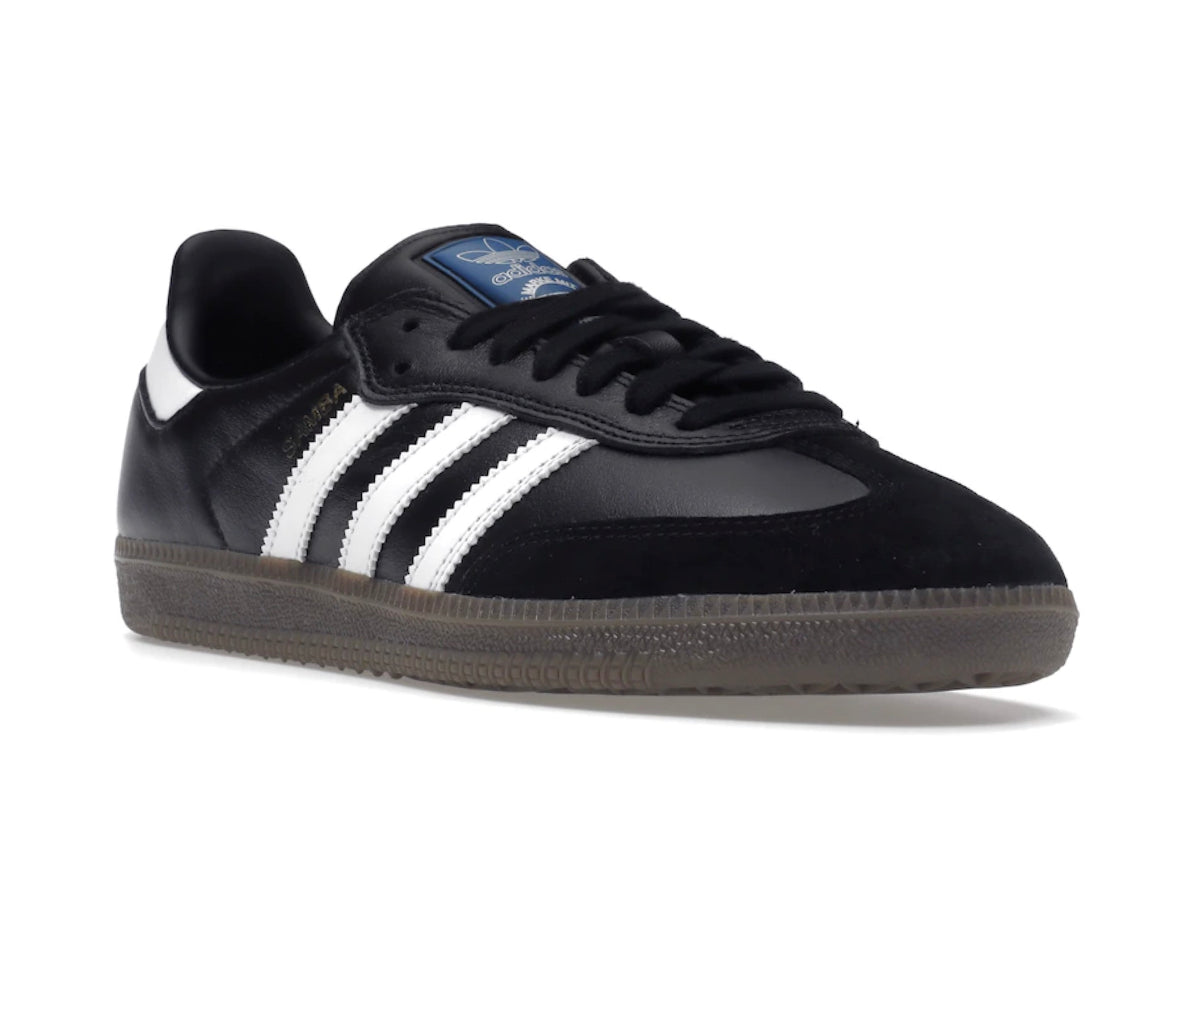 Adidas Samba Sneakers Black White Gum – Curated by Charbel